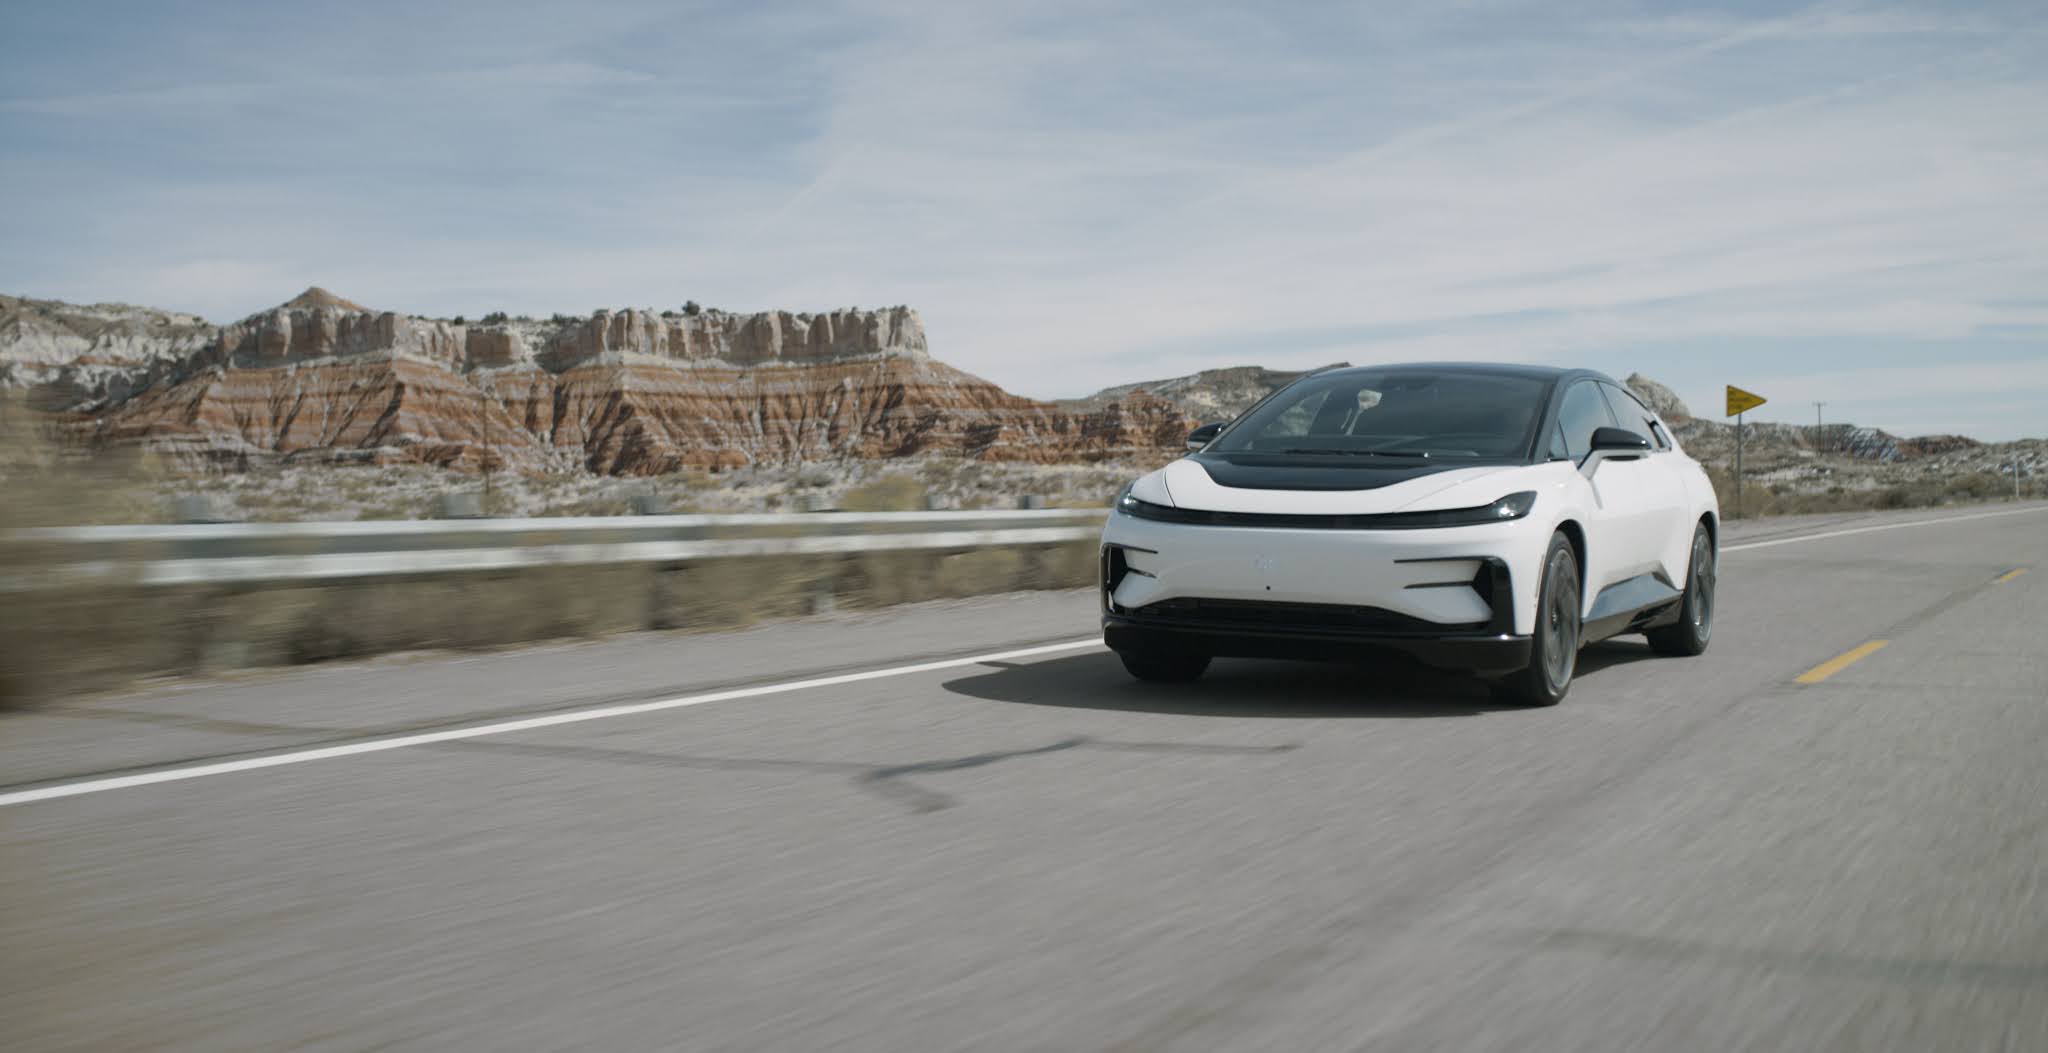 FF 91 luxury RV from Faraday Future to be powered by lidar technology